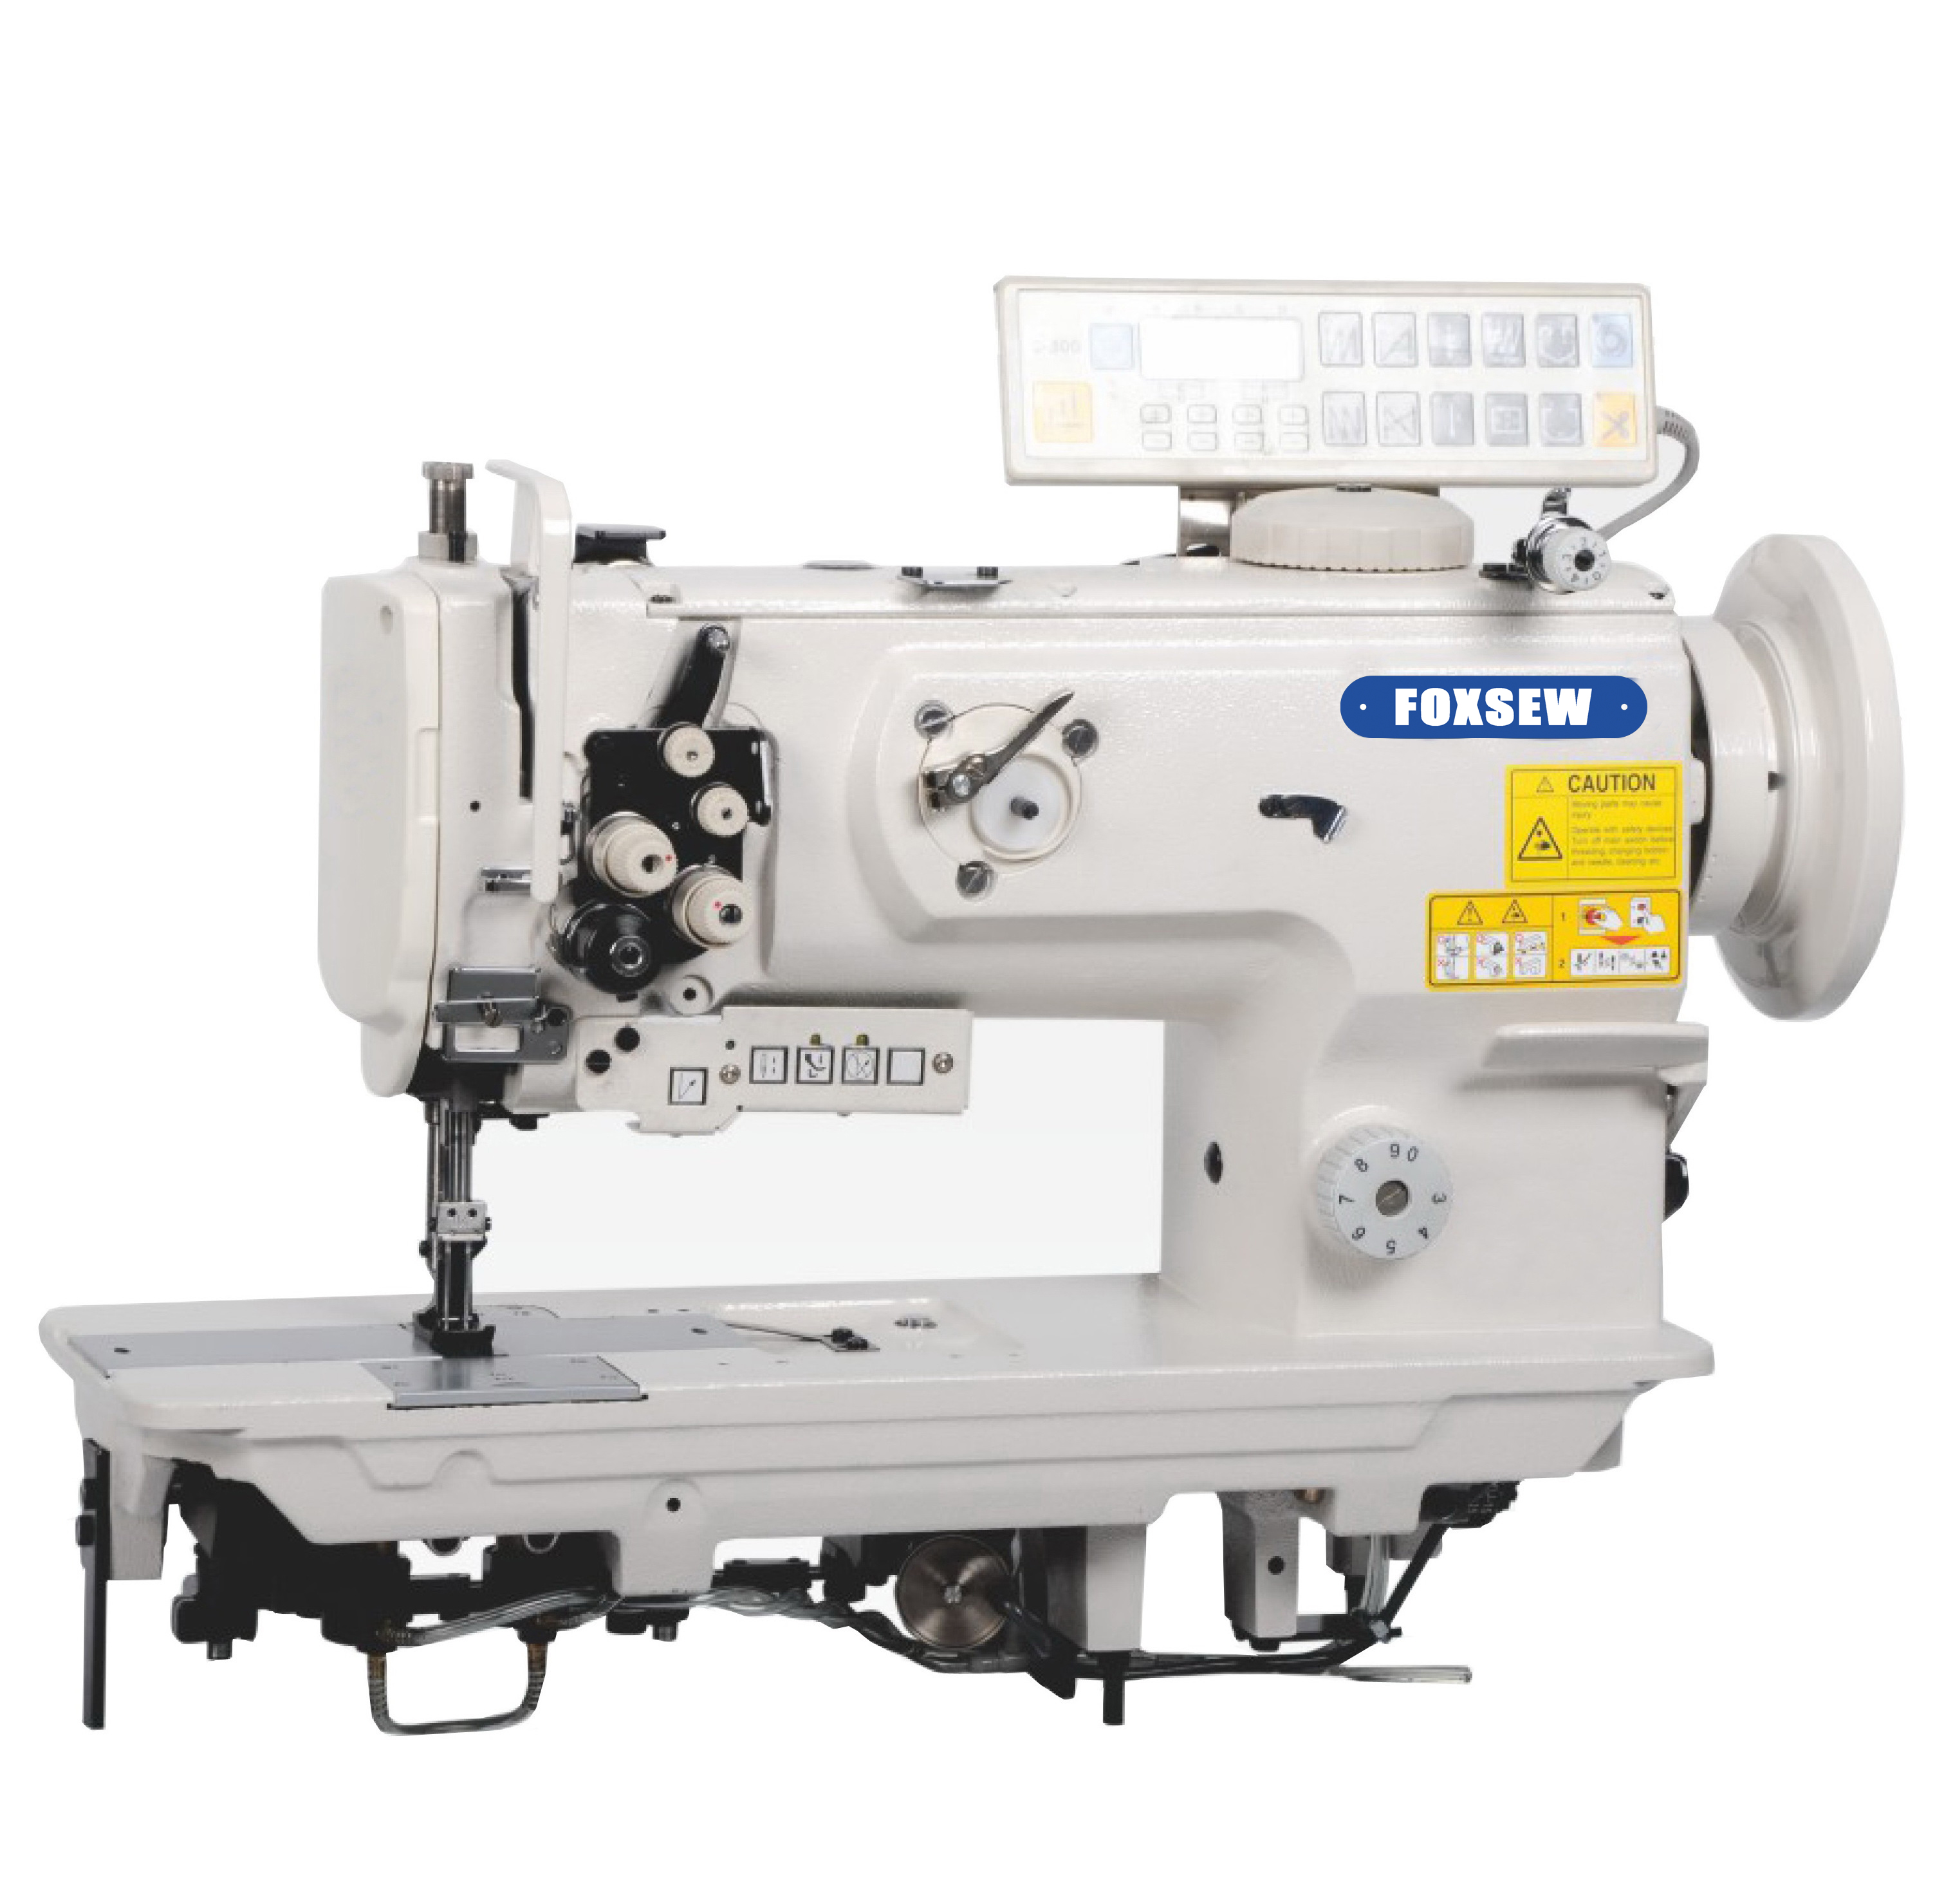 KD-1560N-7 Double Needle Unison Feed Walking Foot Heavy Duty Lockstitch Sewing Machine with Automatic Thread Trimmer